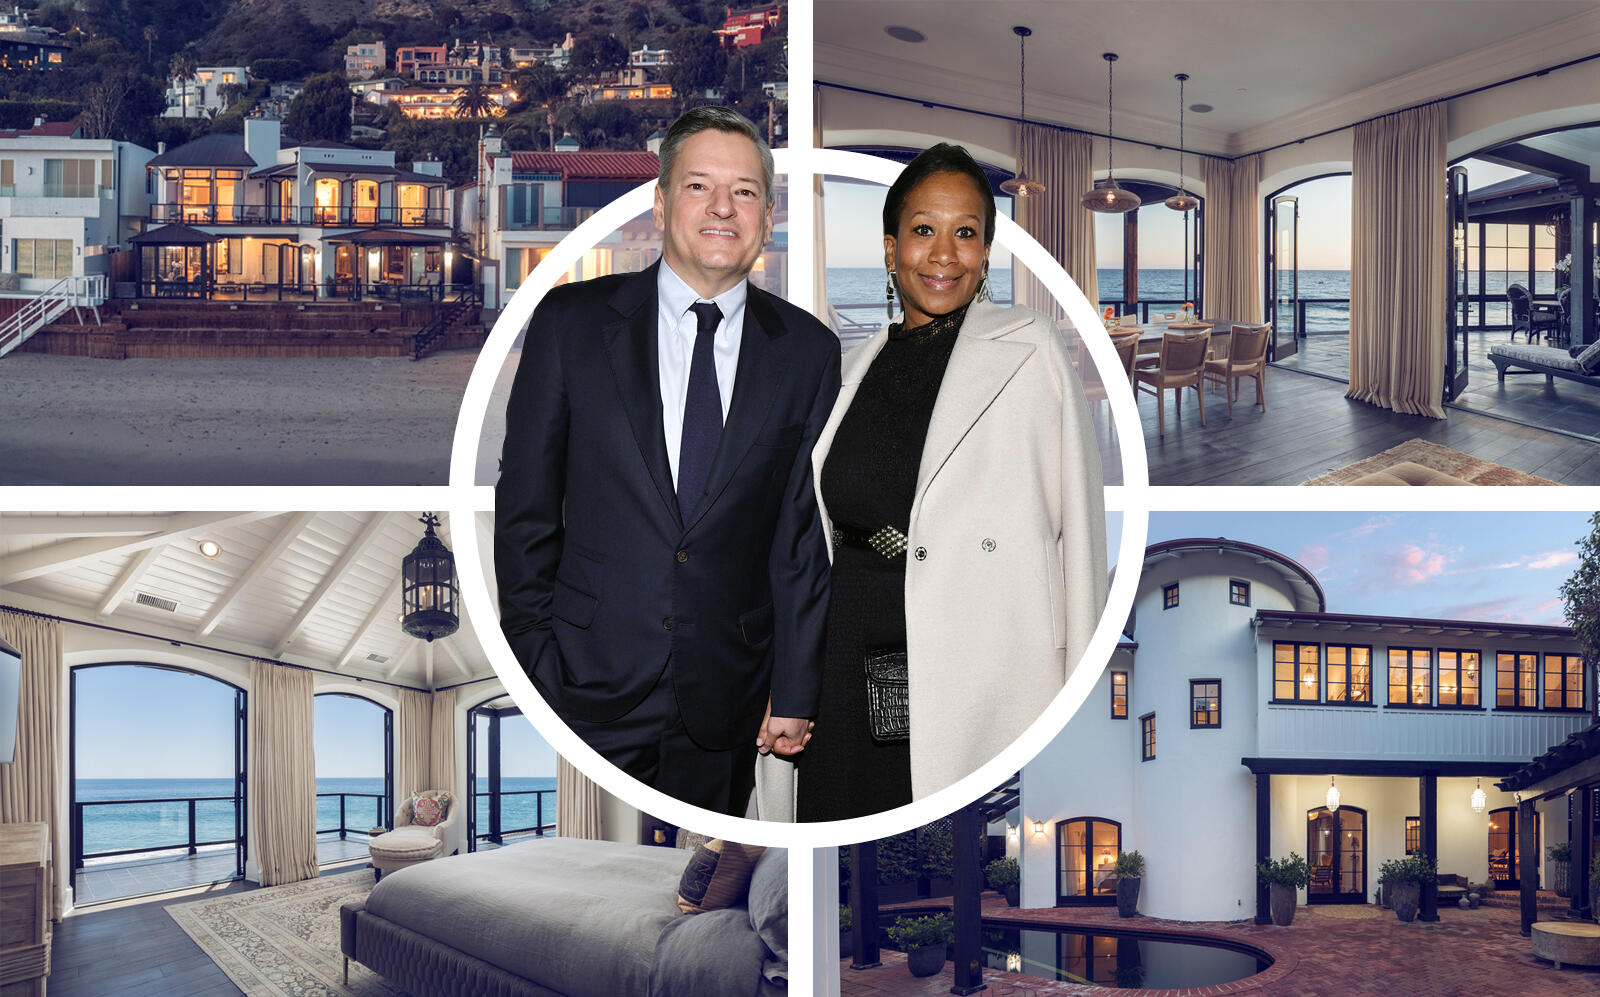 Netflix co-CEO Ted Sarandos and his wife Nicole Avant are selling their Malibu home that they purchased from David Spade. (Getty, Compass)